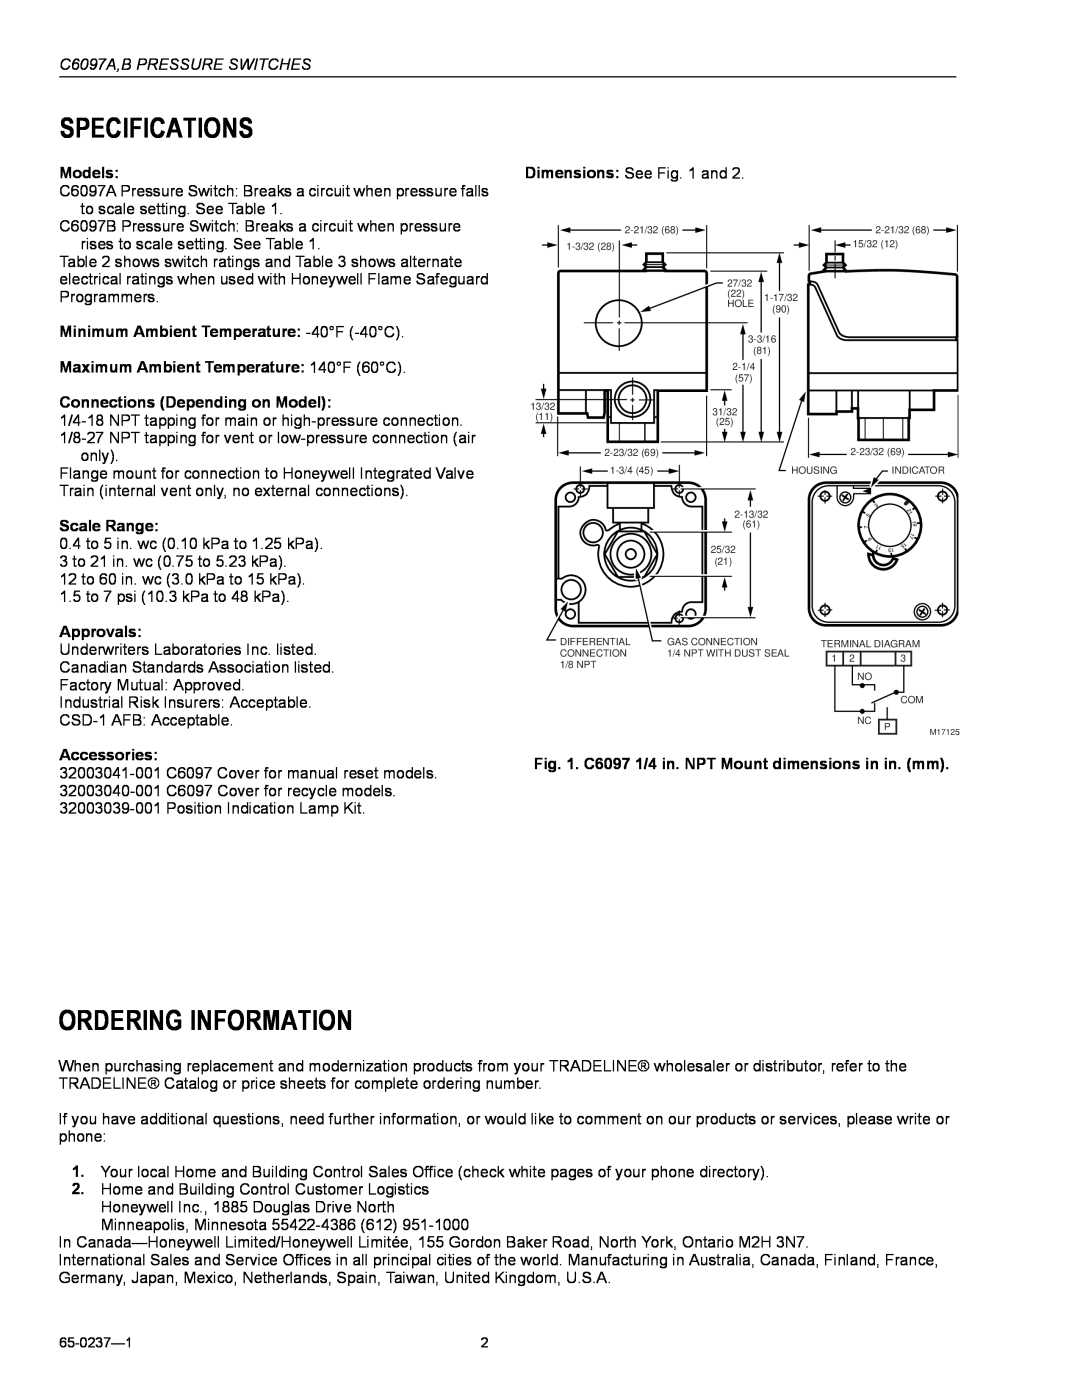 Honeywell Specifications, Ordering Information, C6097A,B PRESSURE SWITCHES, Models, Connections Depending on Model 